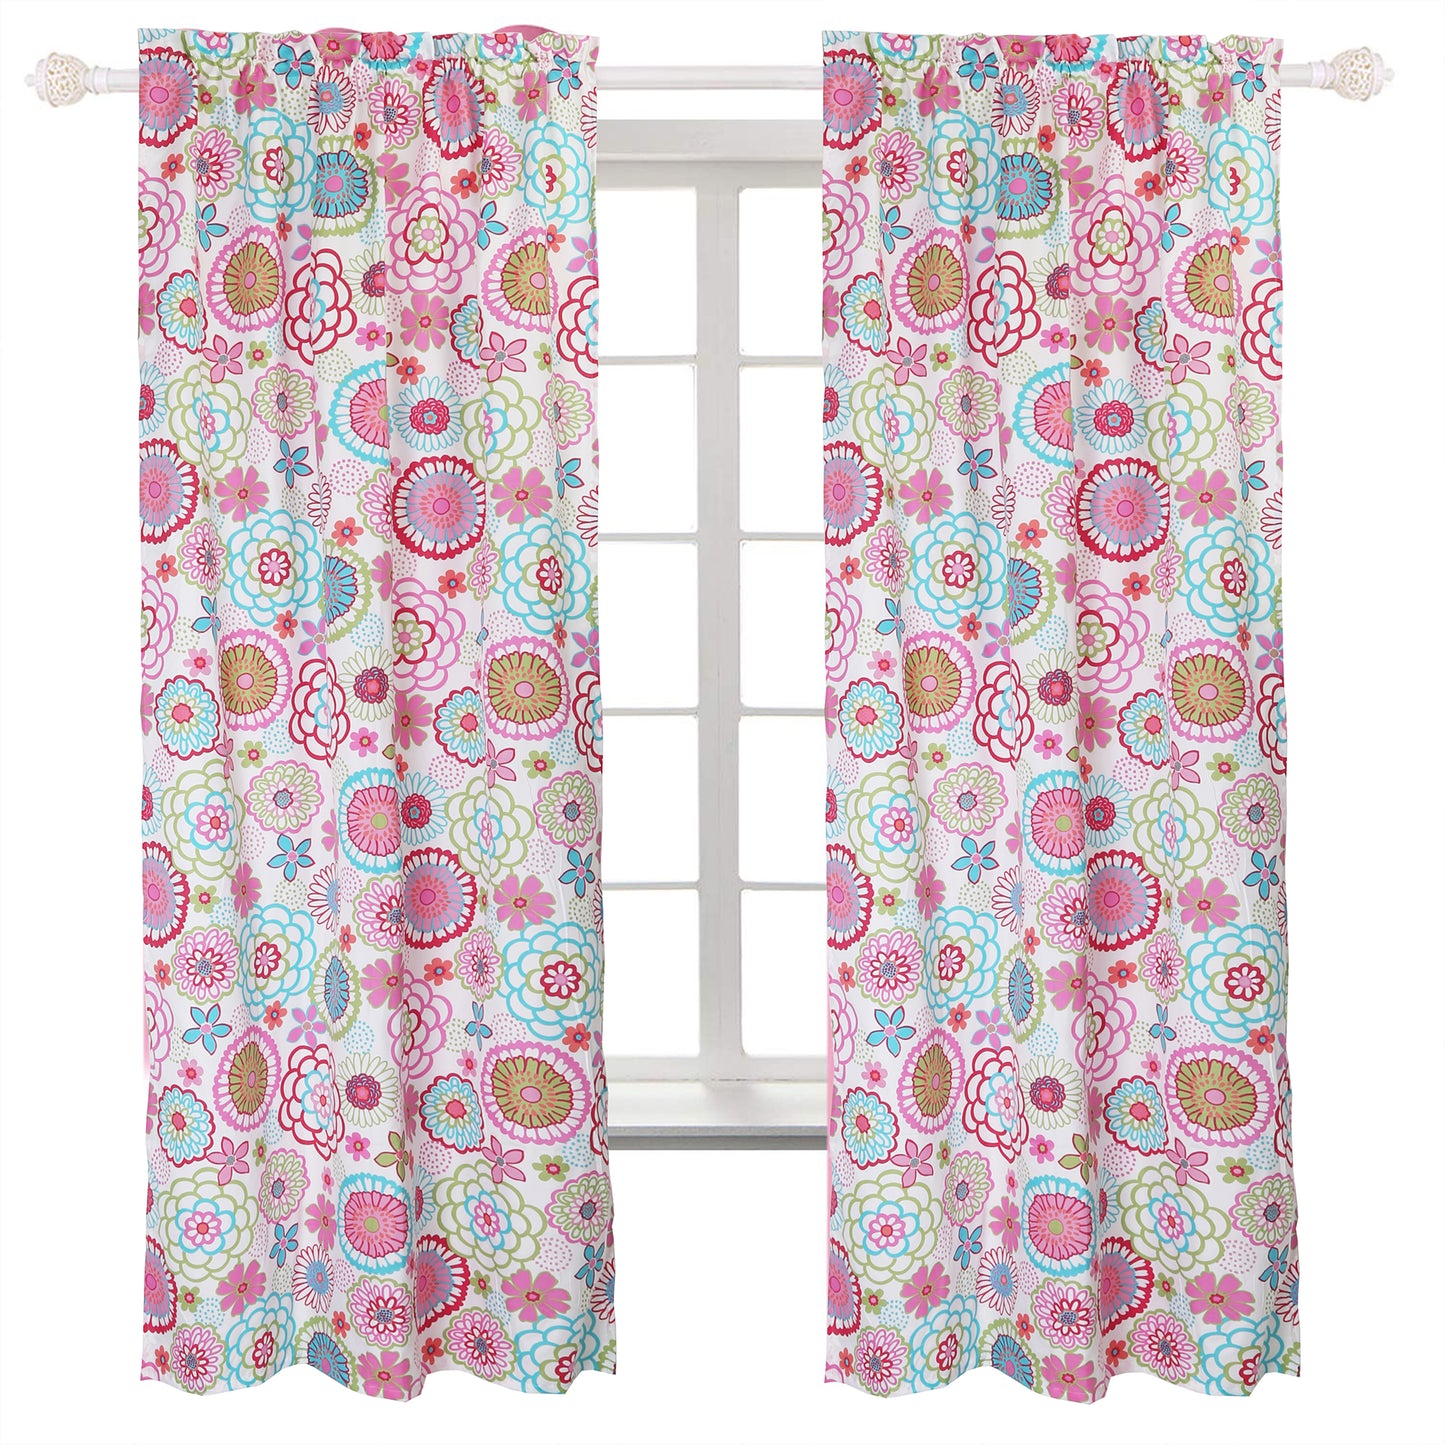 Mariah Pink Floral Polka Dot Bright Multi-Color Flower Window Curtain Panel/Drapes